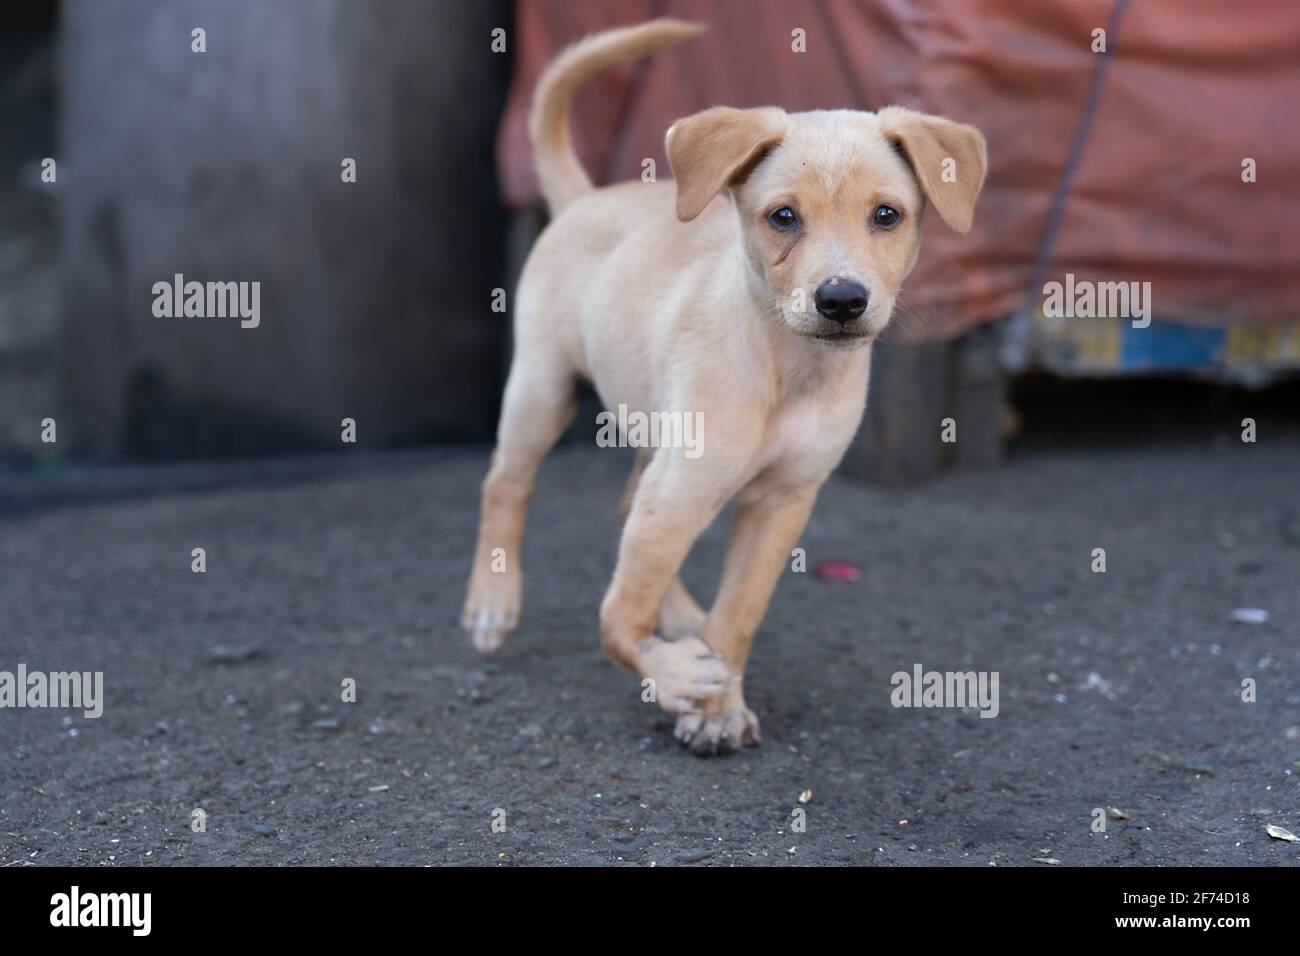 A puppy in a poor area of Cebu City, Philippines with a badly injured front leg but is able to move around freely not seemingly in any pain. Stock Photo